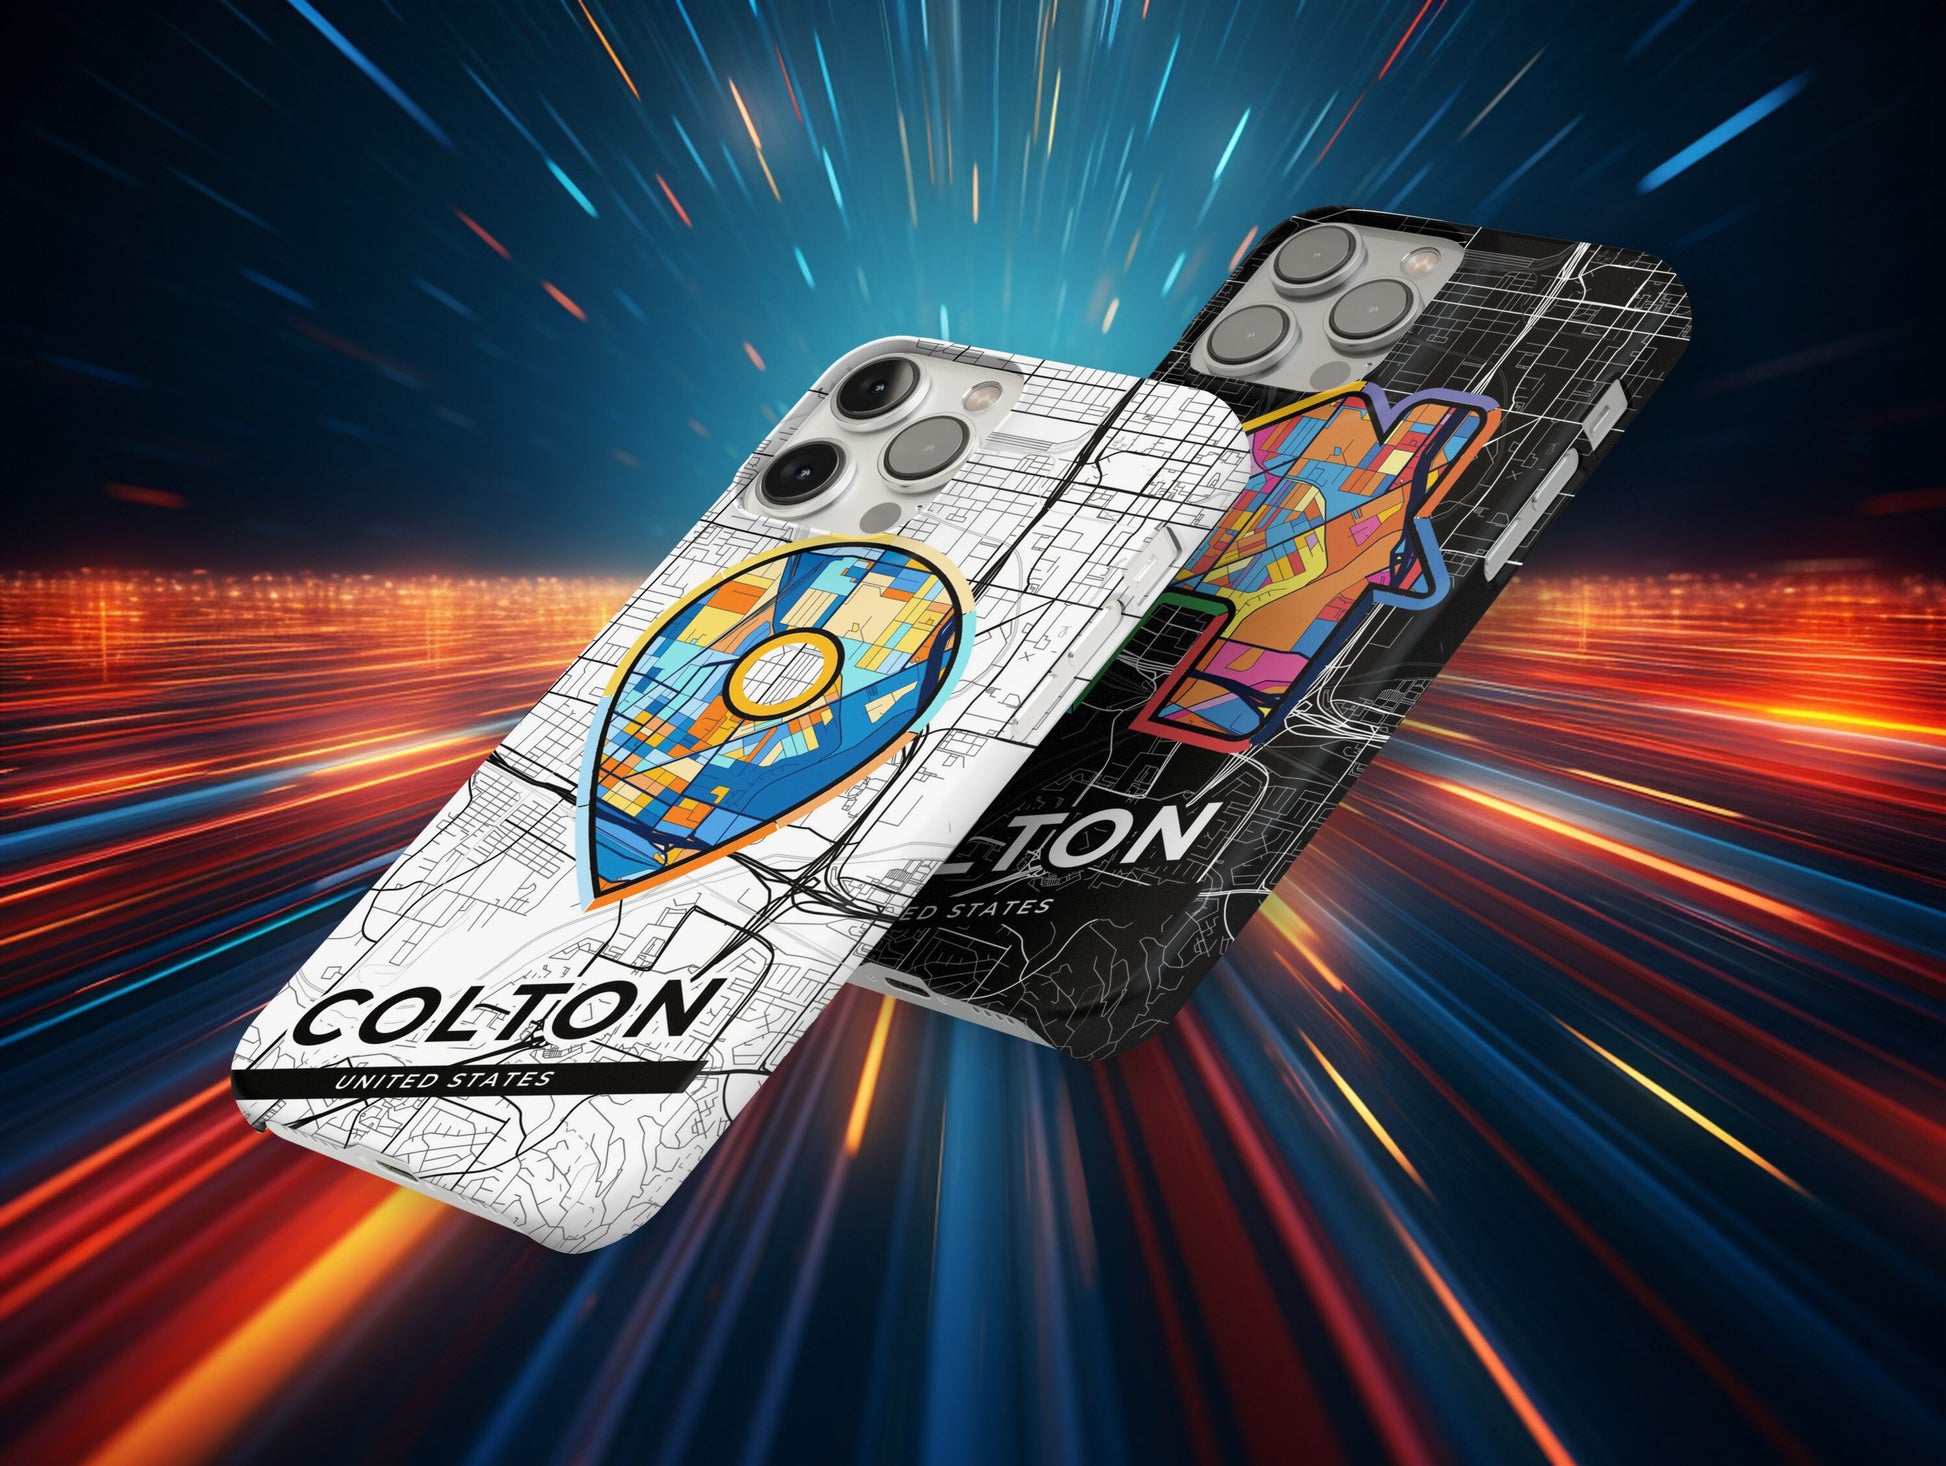 Colton California slim phone case with colorful icon. Birthday, wedding or housewarming gift. Couple match cases.